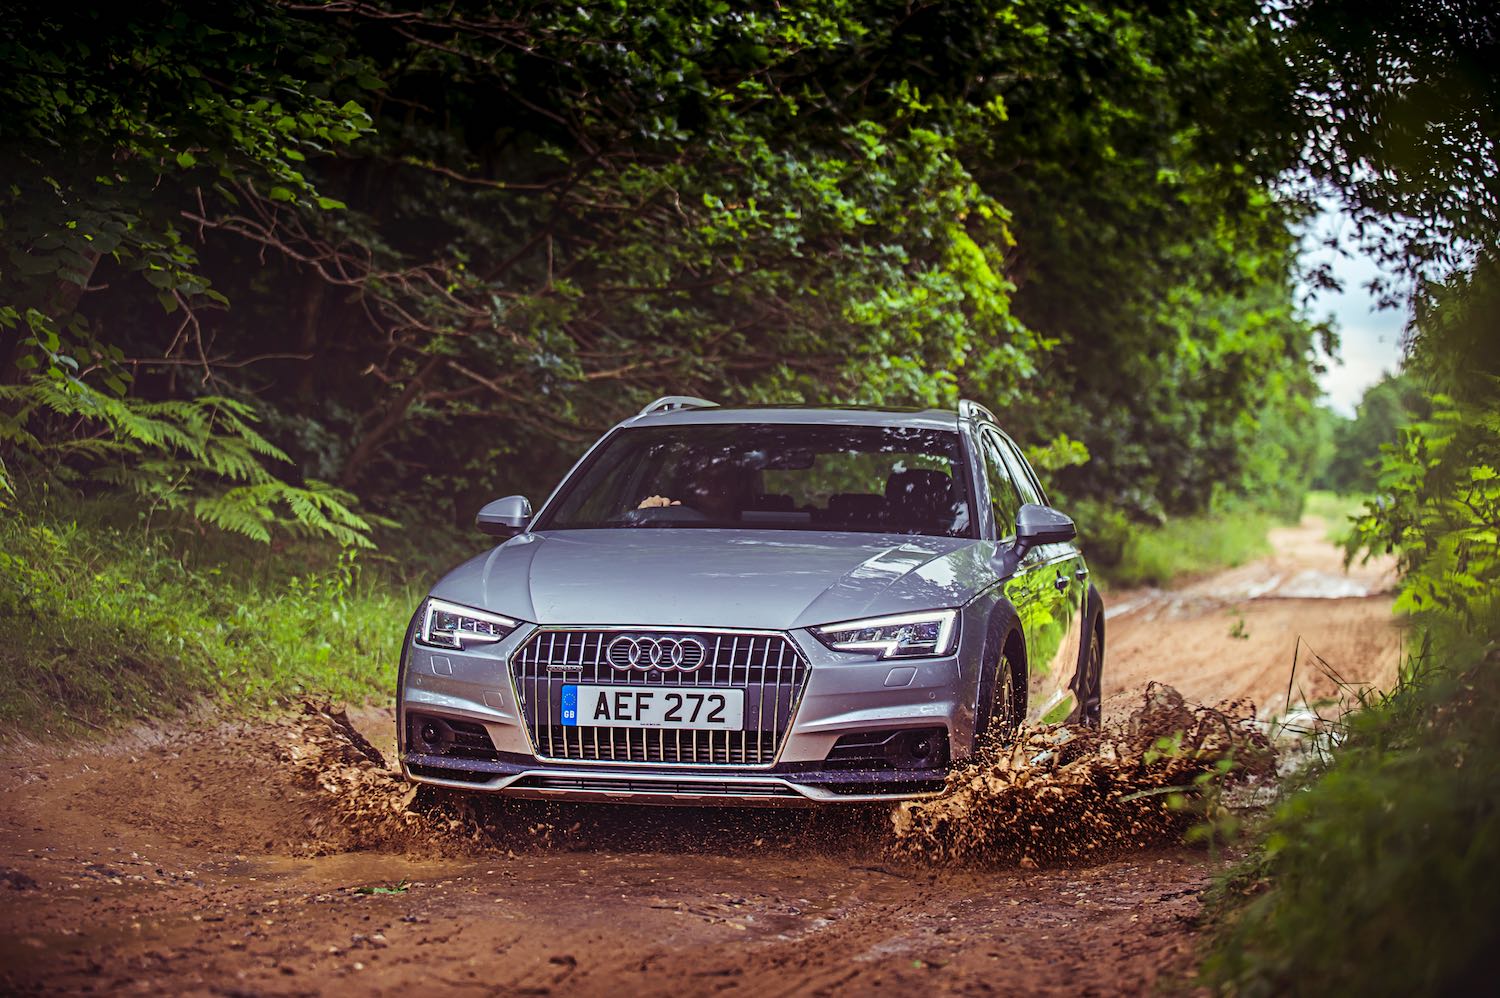 Neil Lyndon reviews the Audi Allroad for drive-8